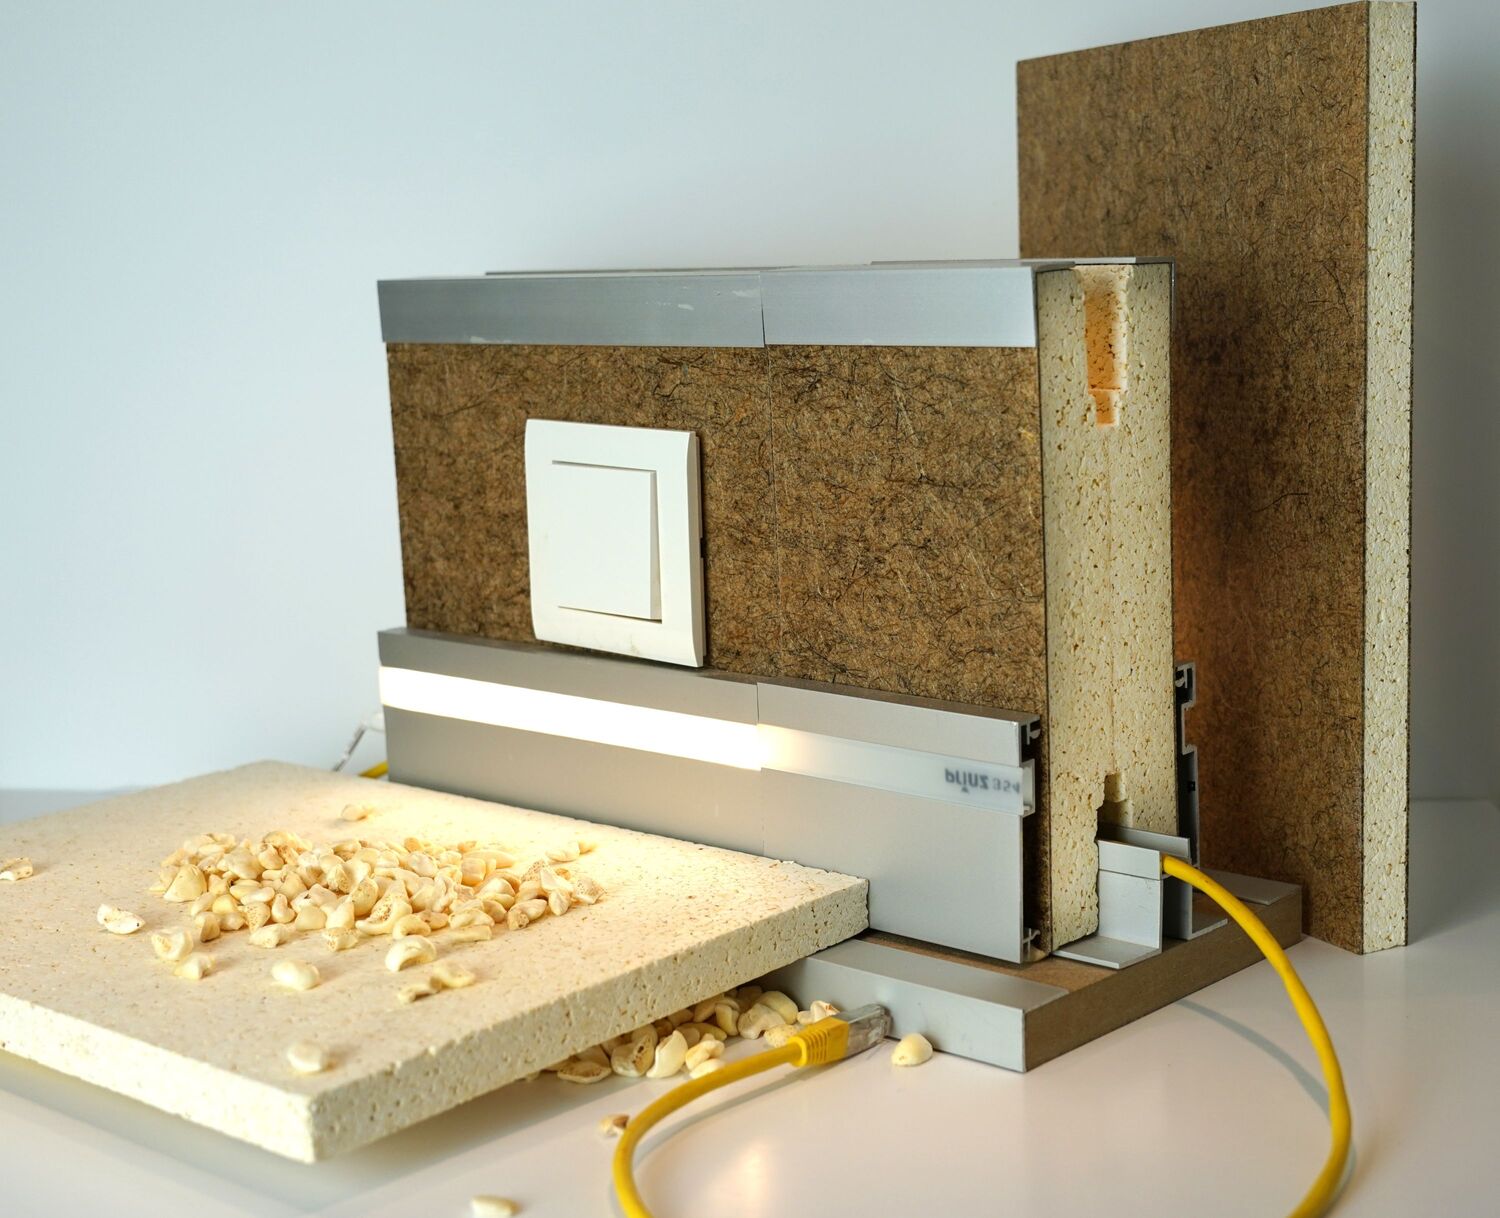 Affordable housing made from environmentally friendly and CO2-neutral building material: scientists at the University of Göttingen have developed a process for producing panels from hemp, flax and popcorn granules.